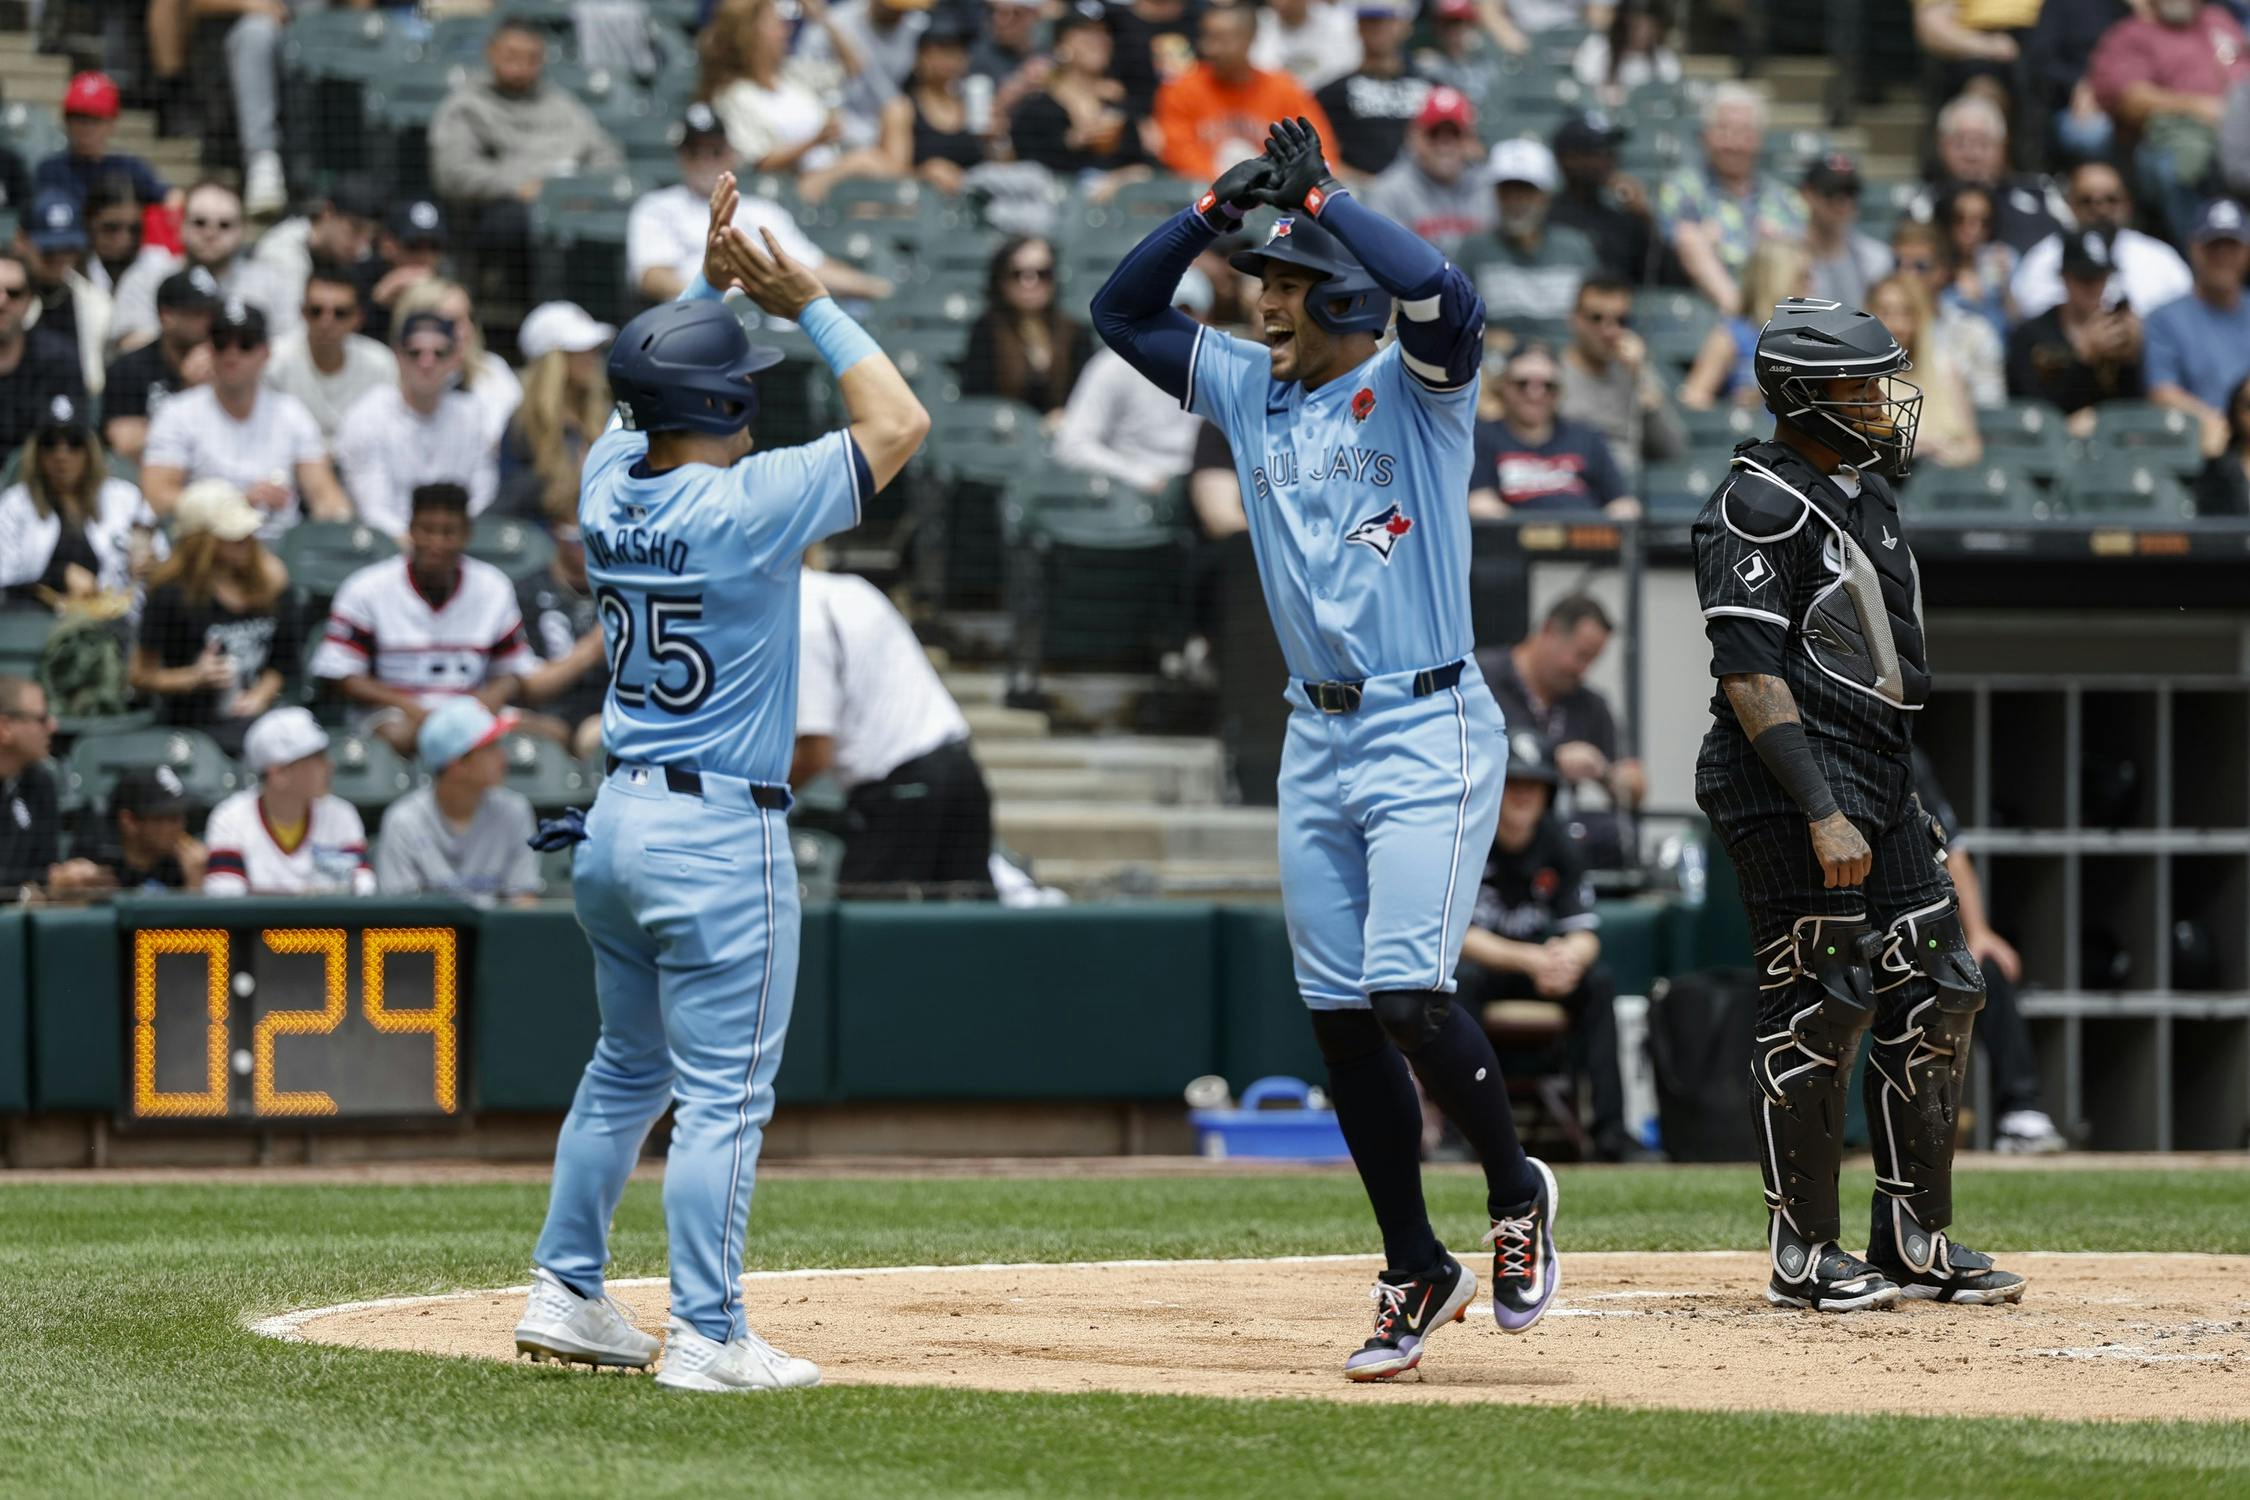 Toronto Blue Jays outfielder George Springer (4) celebrates with outfielder Daulton Varsho (25) after hitting a two-run home run against the Chicago White Sox during the second inning at Guaranteed Rate Field.